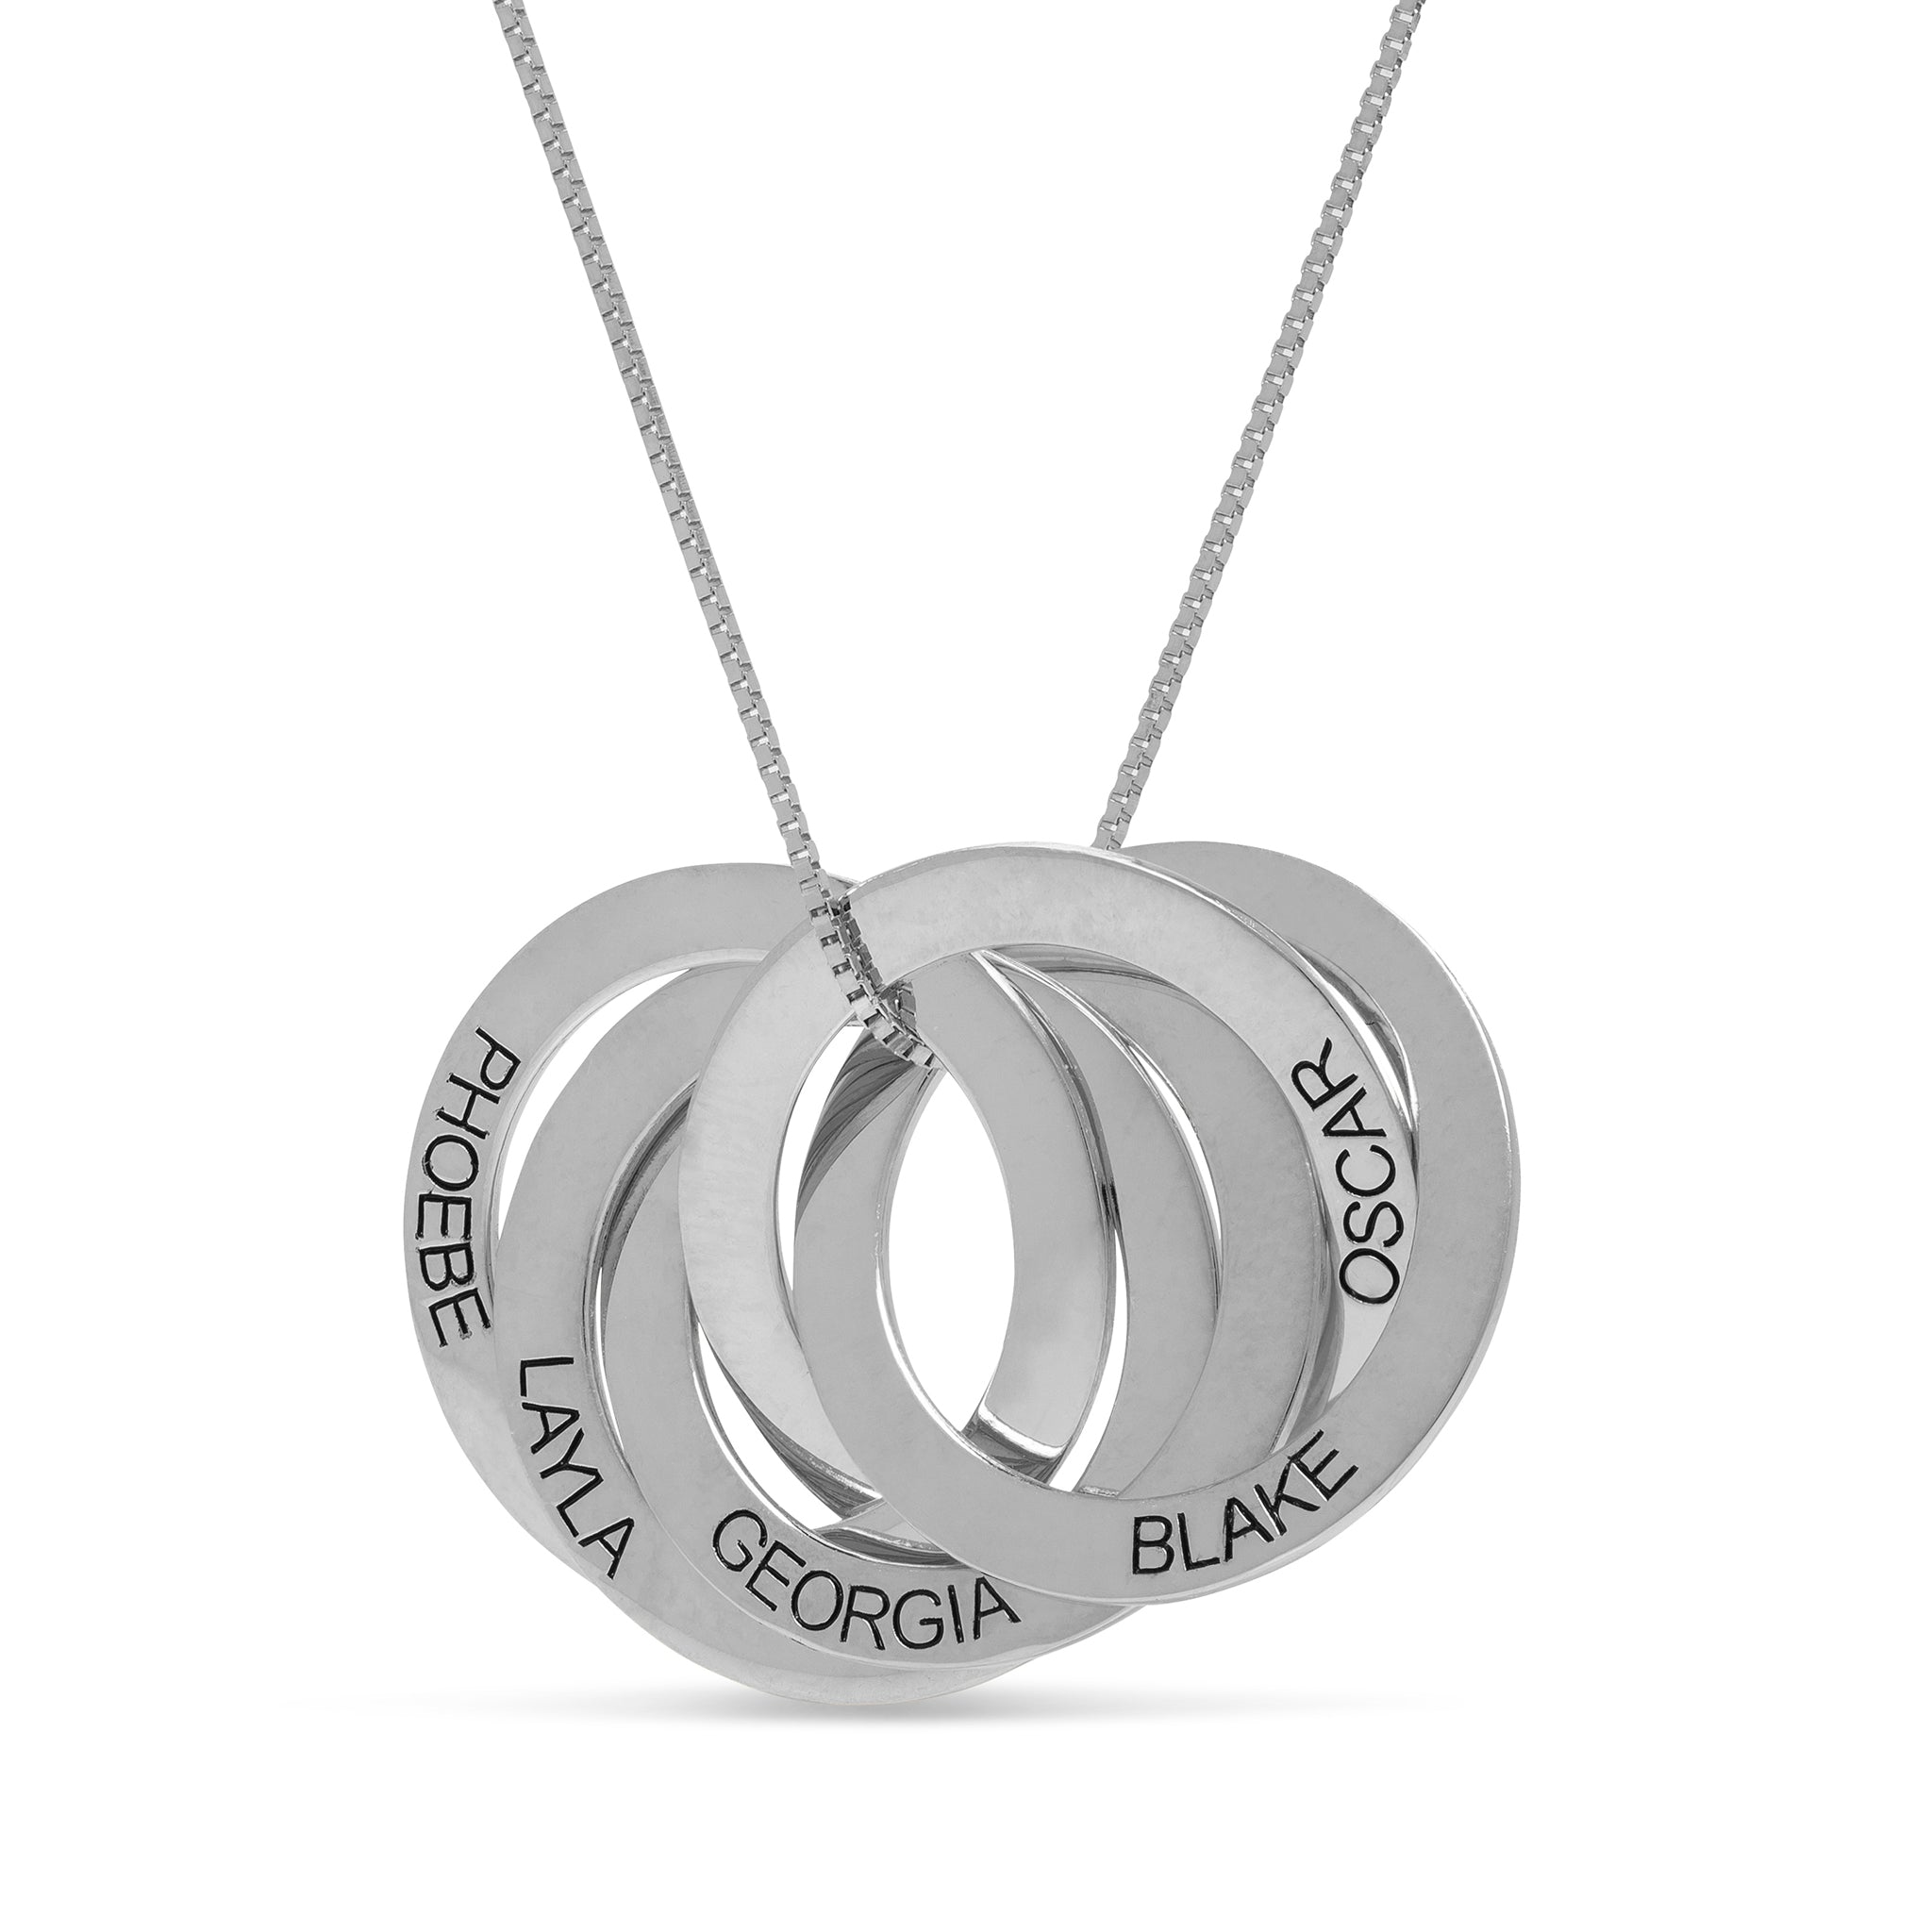 Interlinked Russian Ring Necklace - 5 Rings